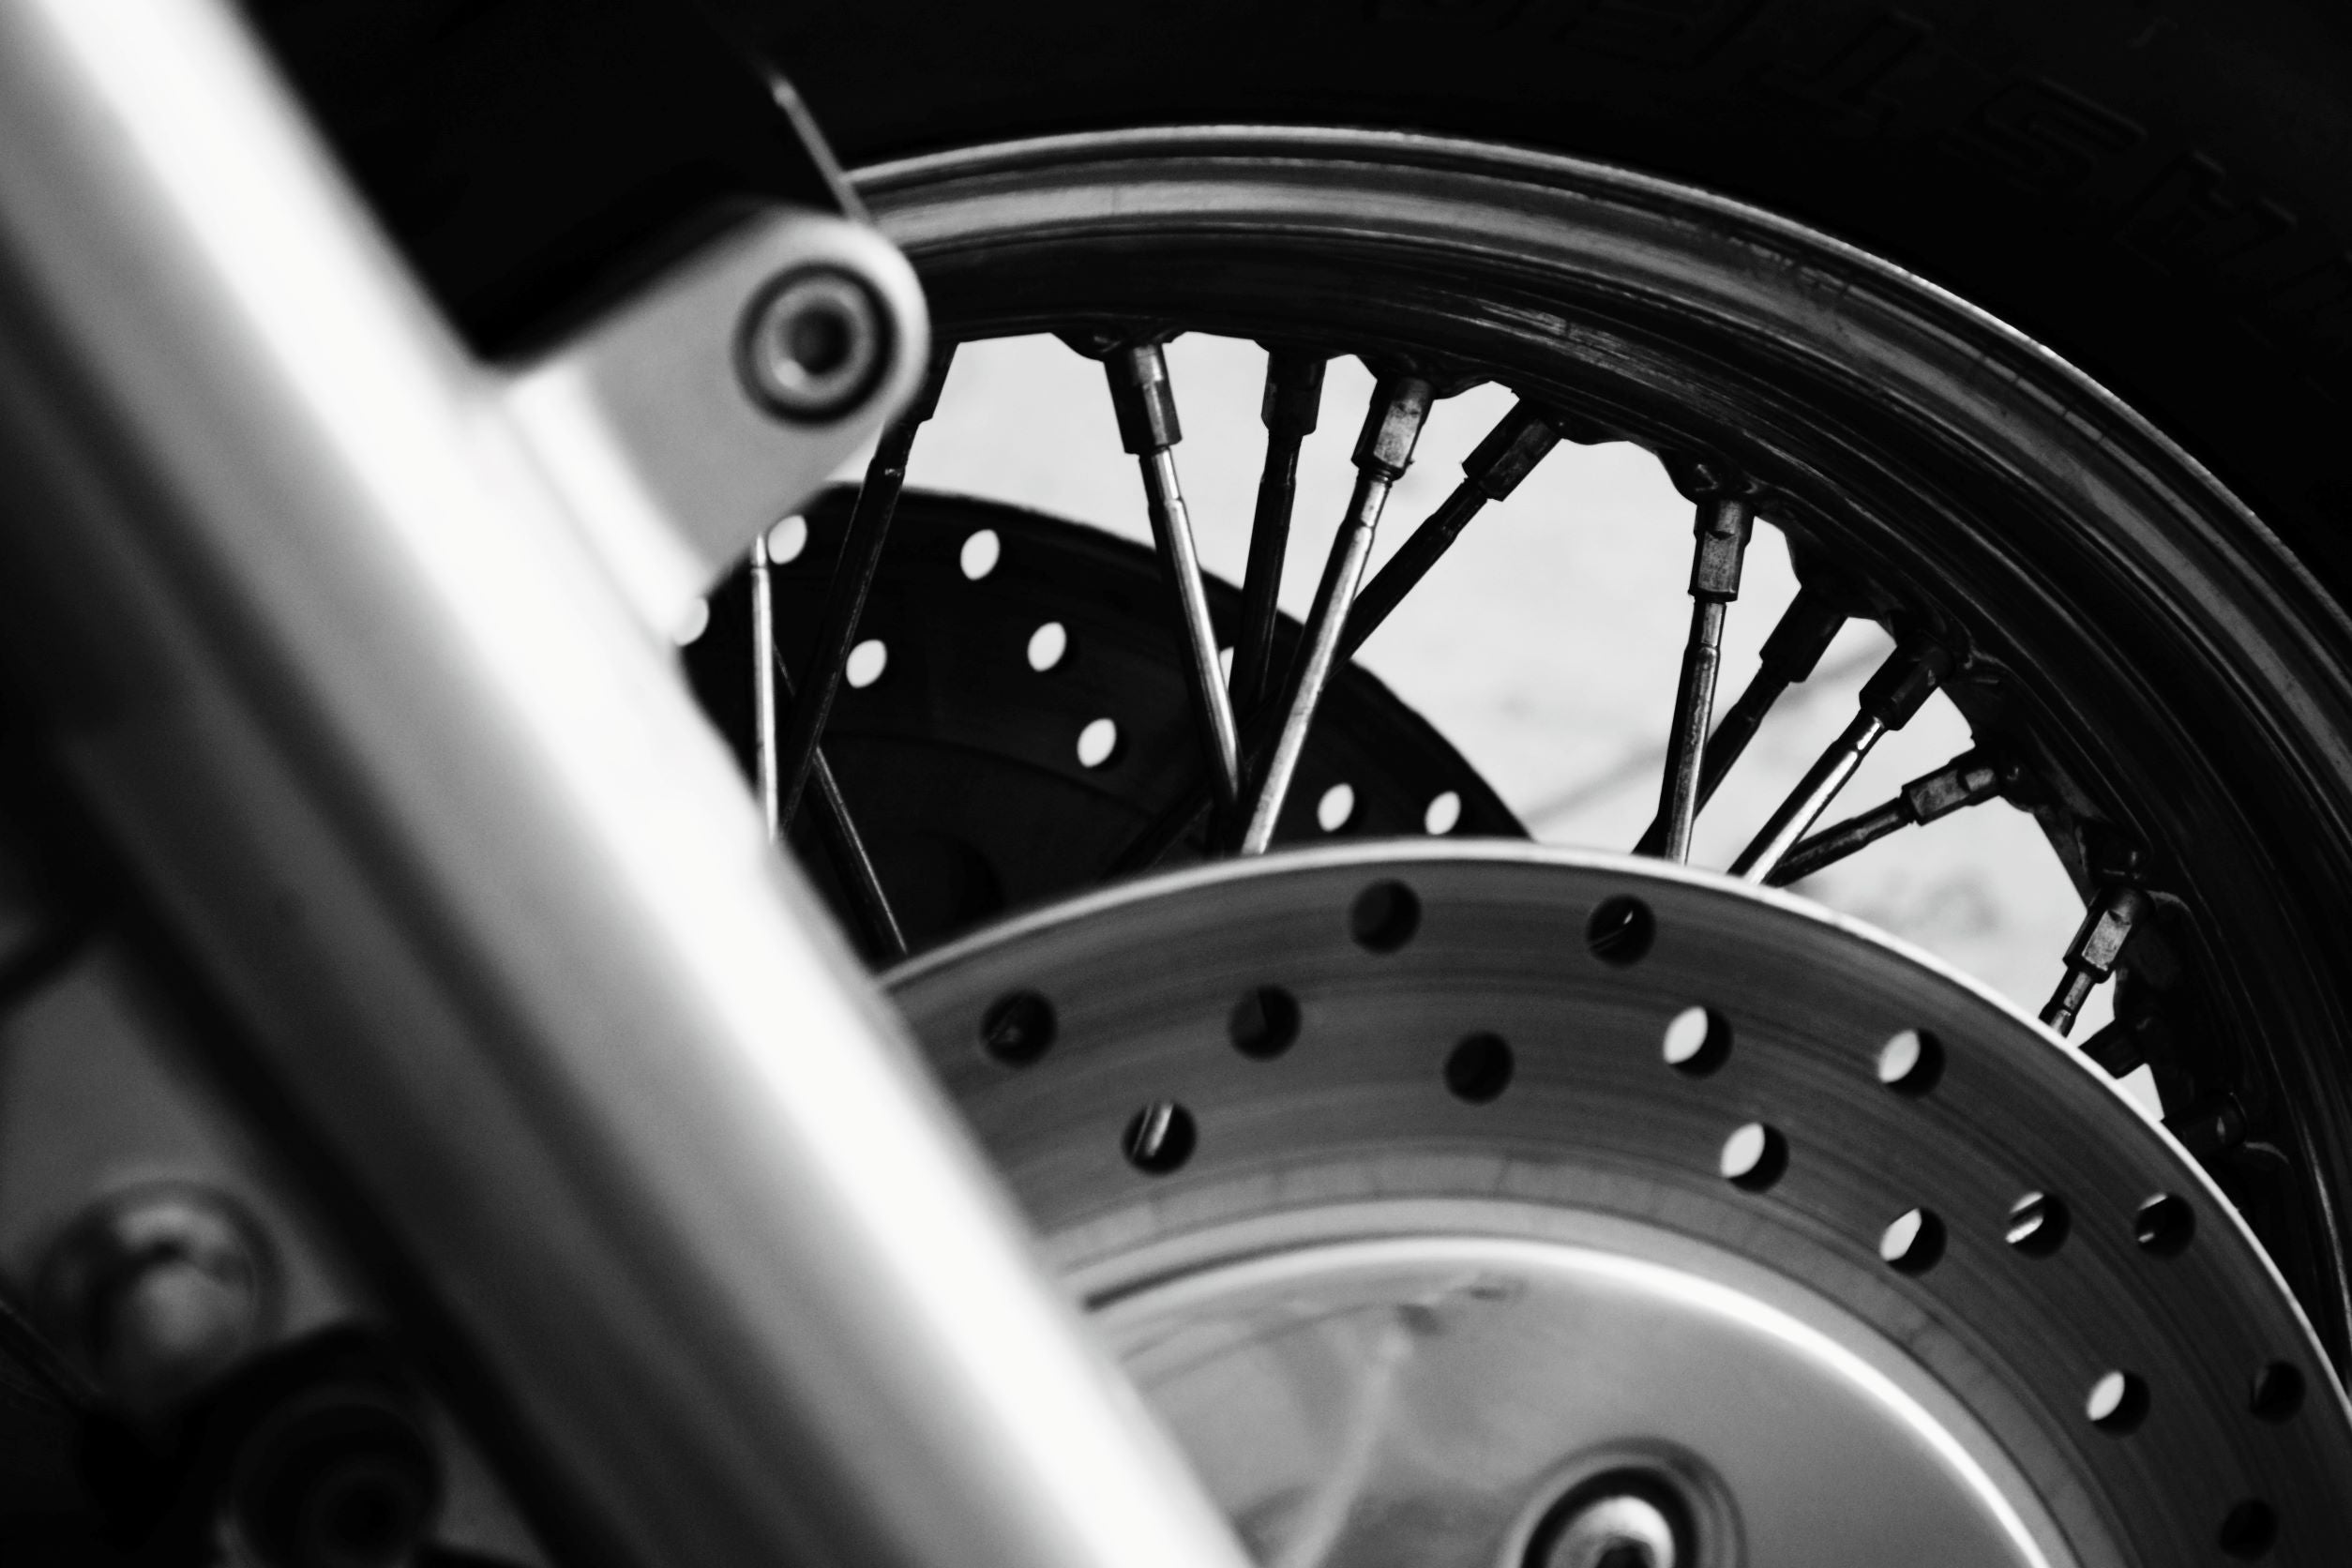 How To Care For Motorcycle’s Disc Brakes